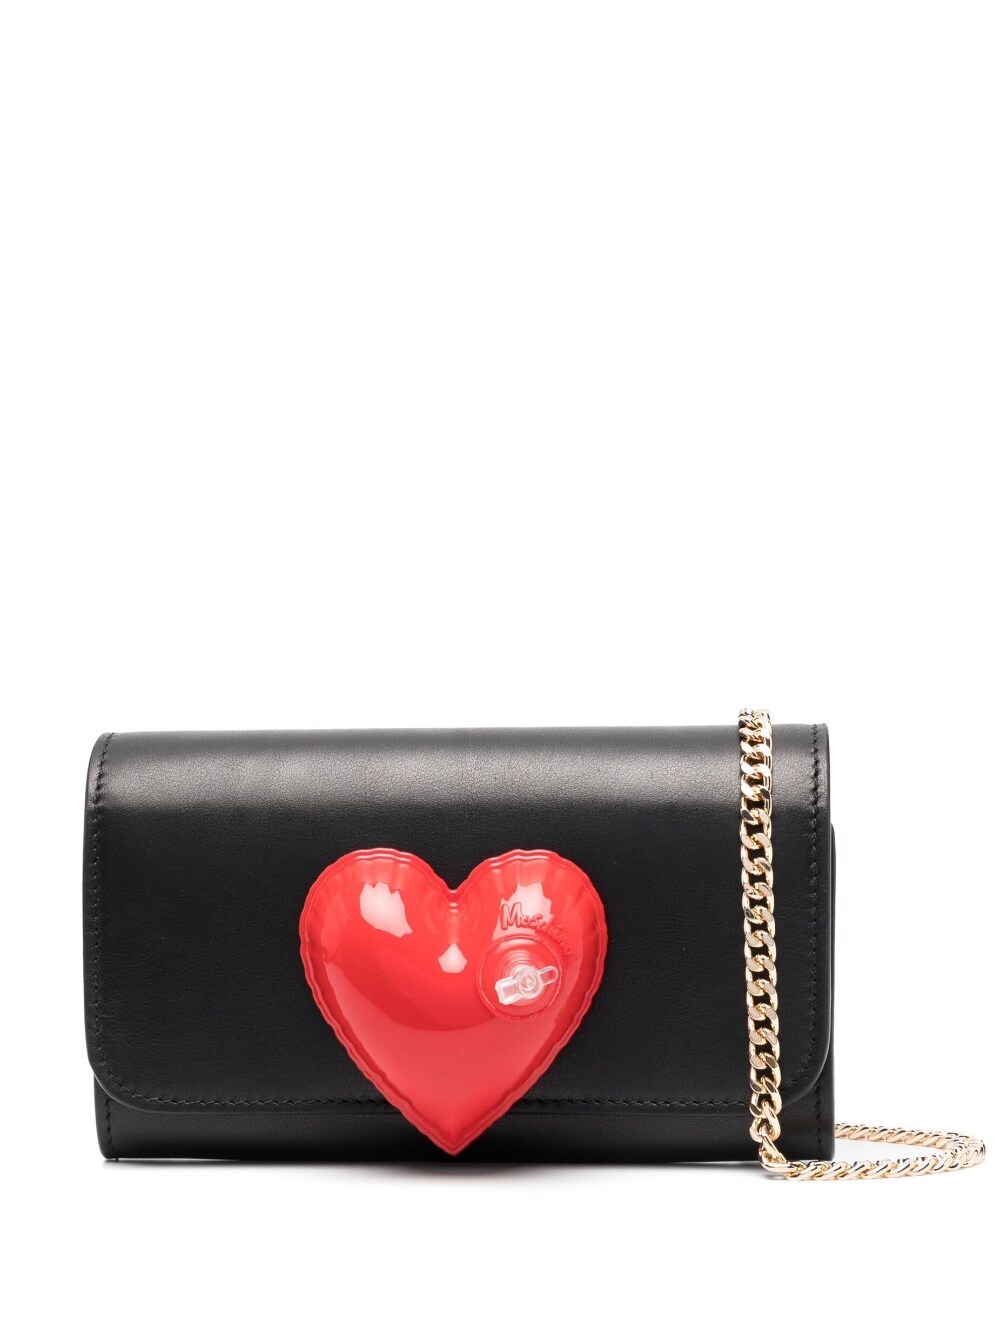 Moschino Clutch Made Of Calf Leather In Black